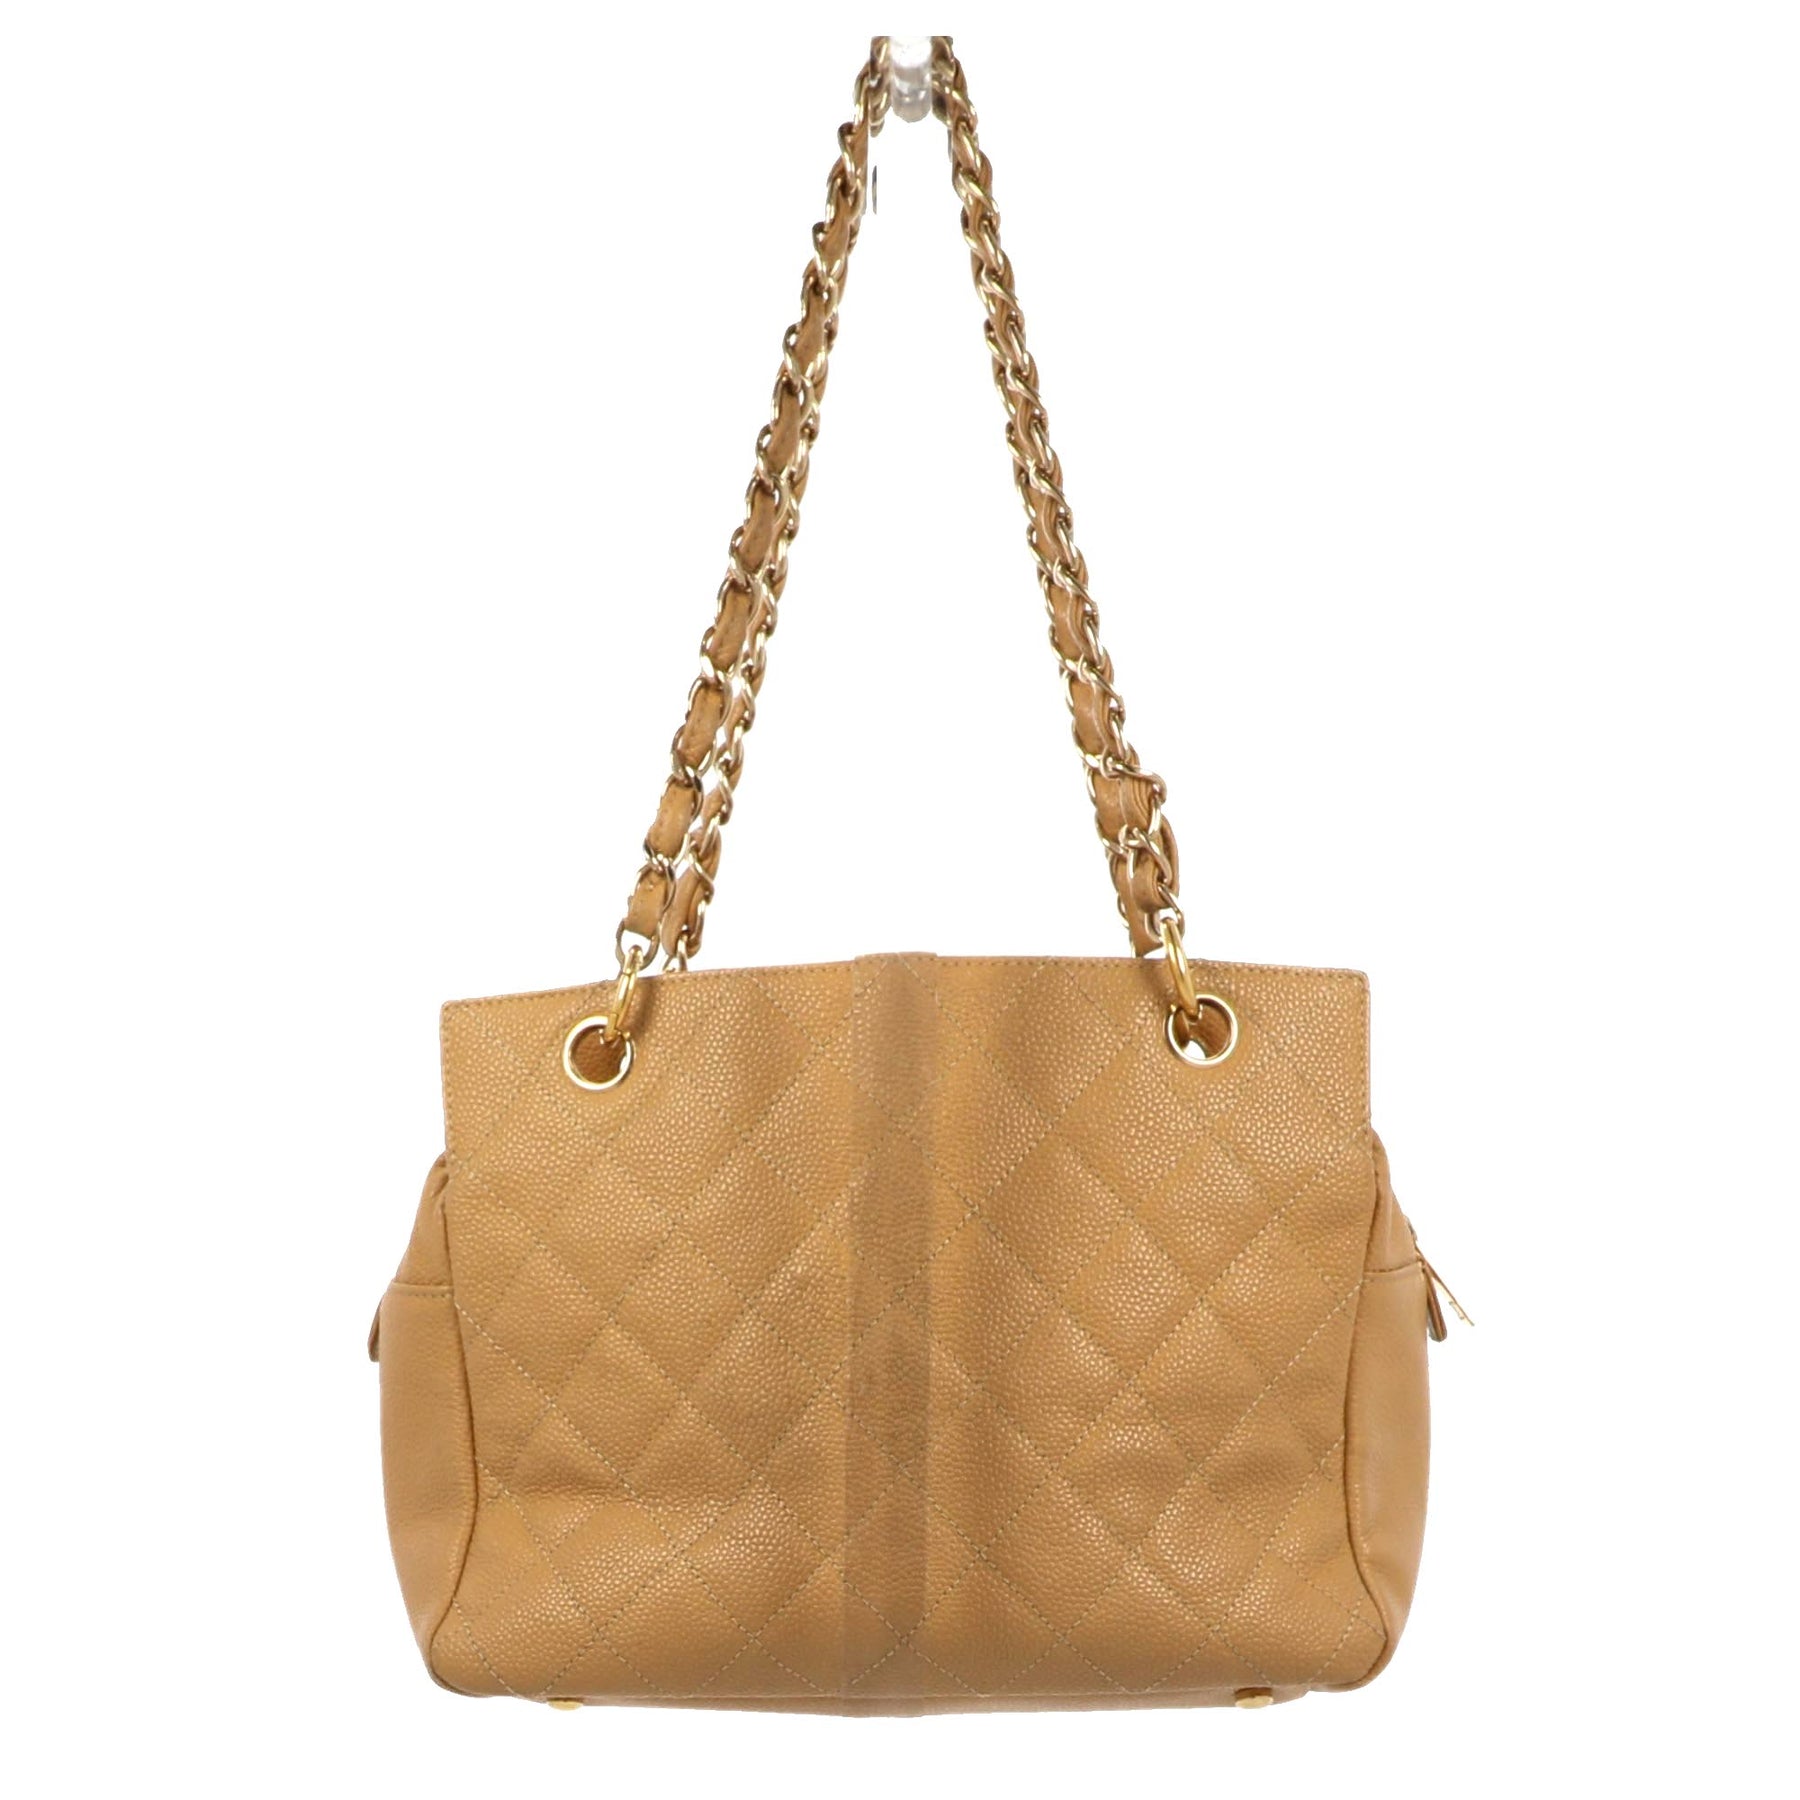 Chanel - Authenticated Petite Shopping Tote Handbag - Leather Beige Plain for Women, Very Good Condition